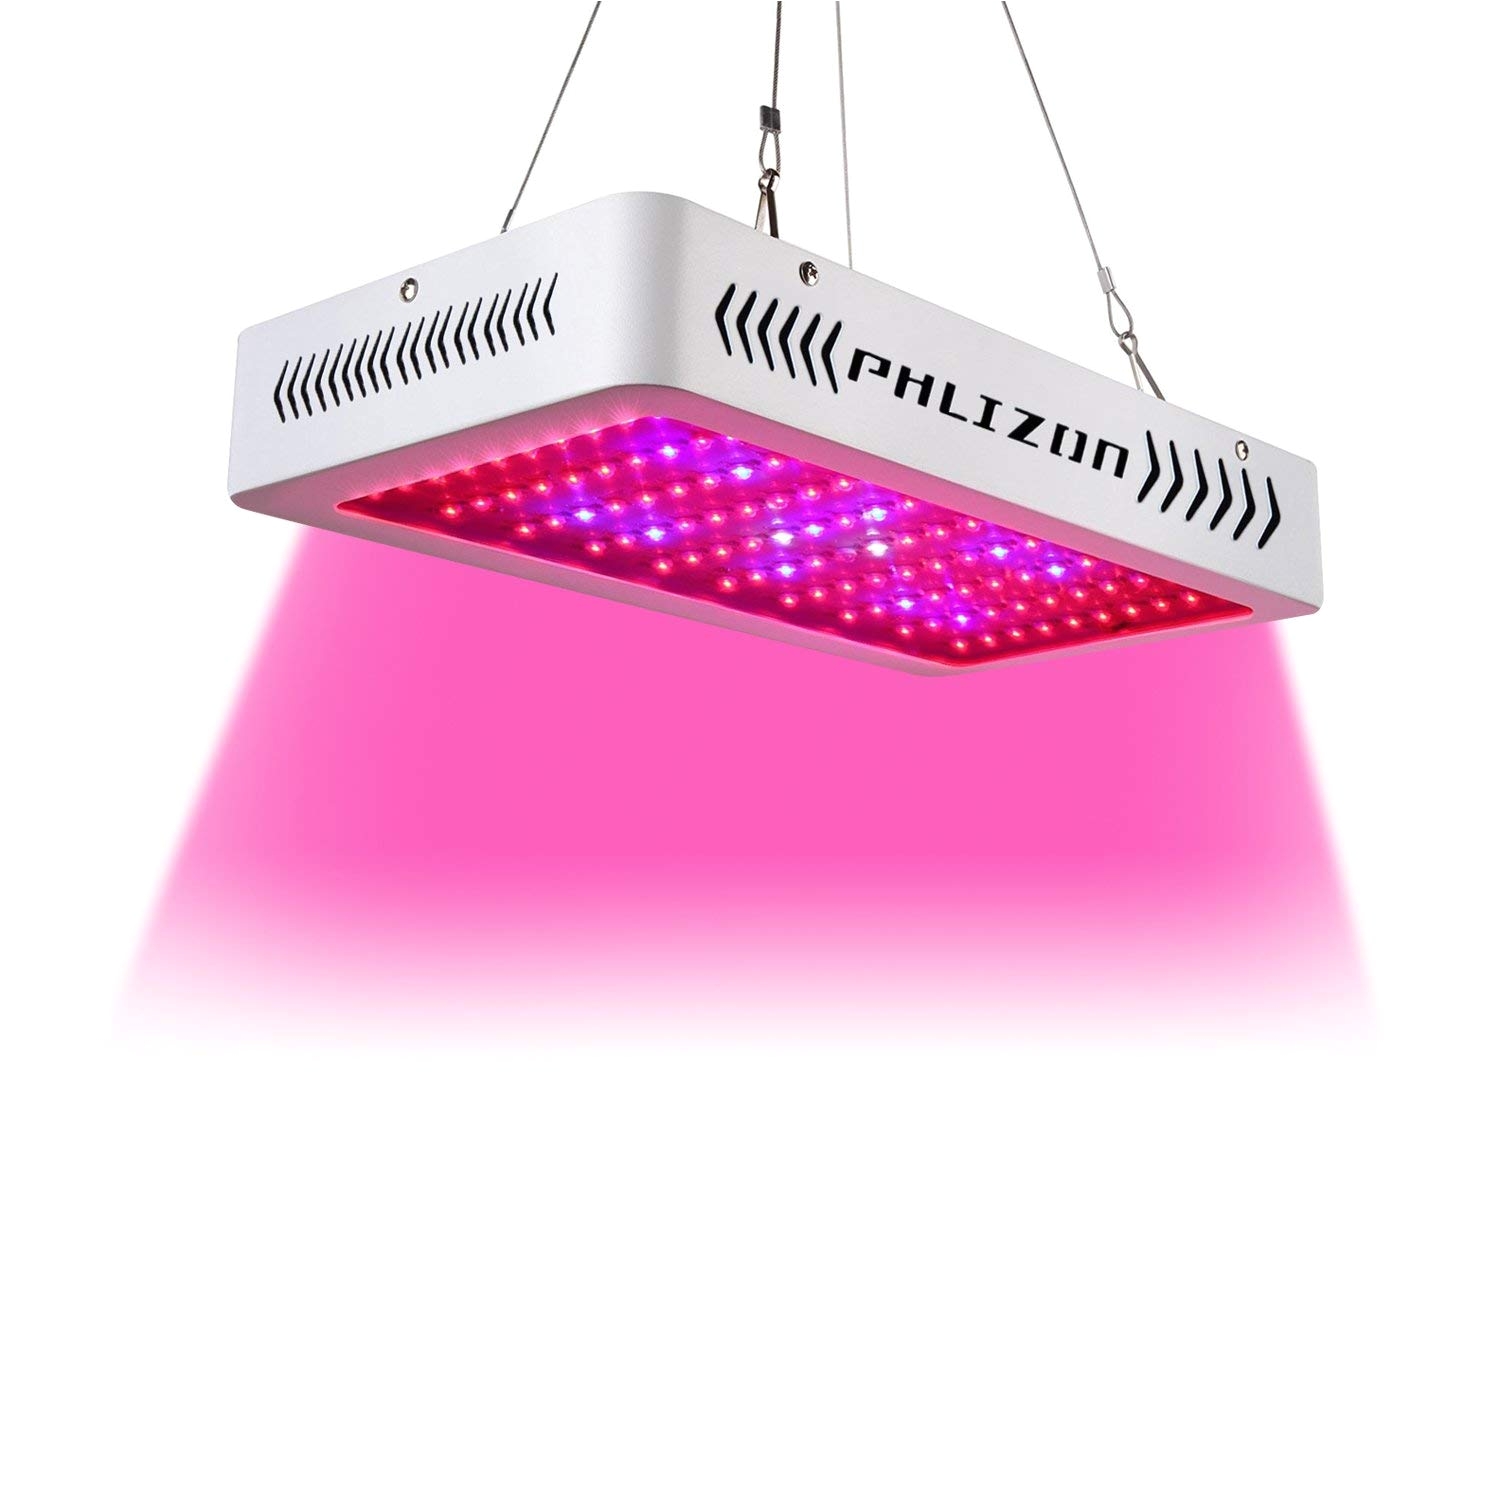 amazon com phlizon led grow light 300w indoor plant grow lights with hangers full spectrum with uvir for greenhouse hydroponic indoor plants veg and